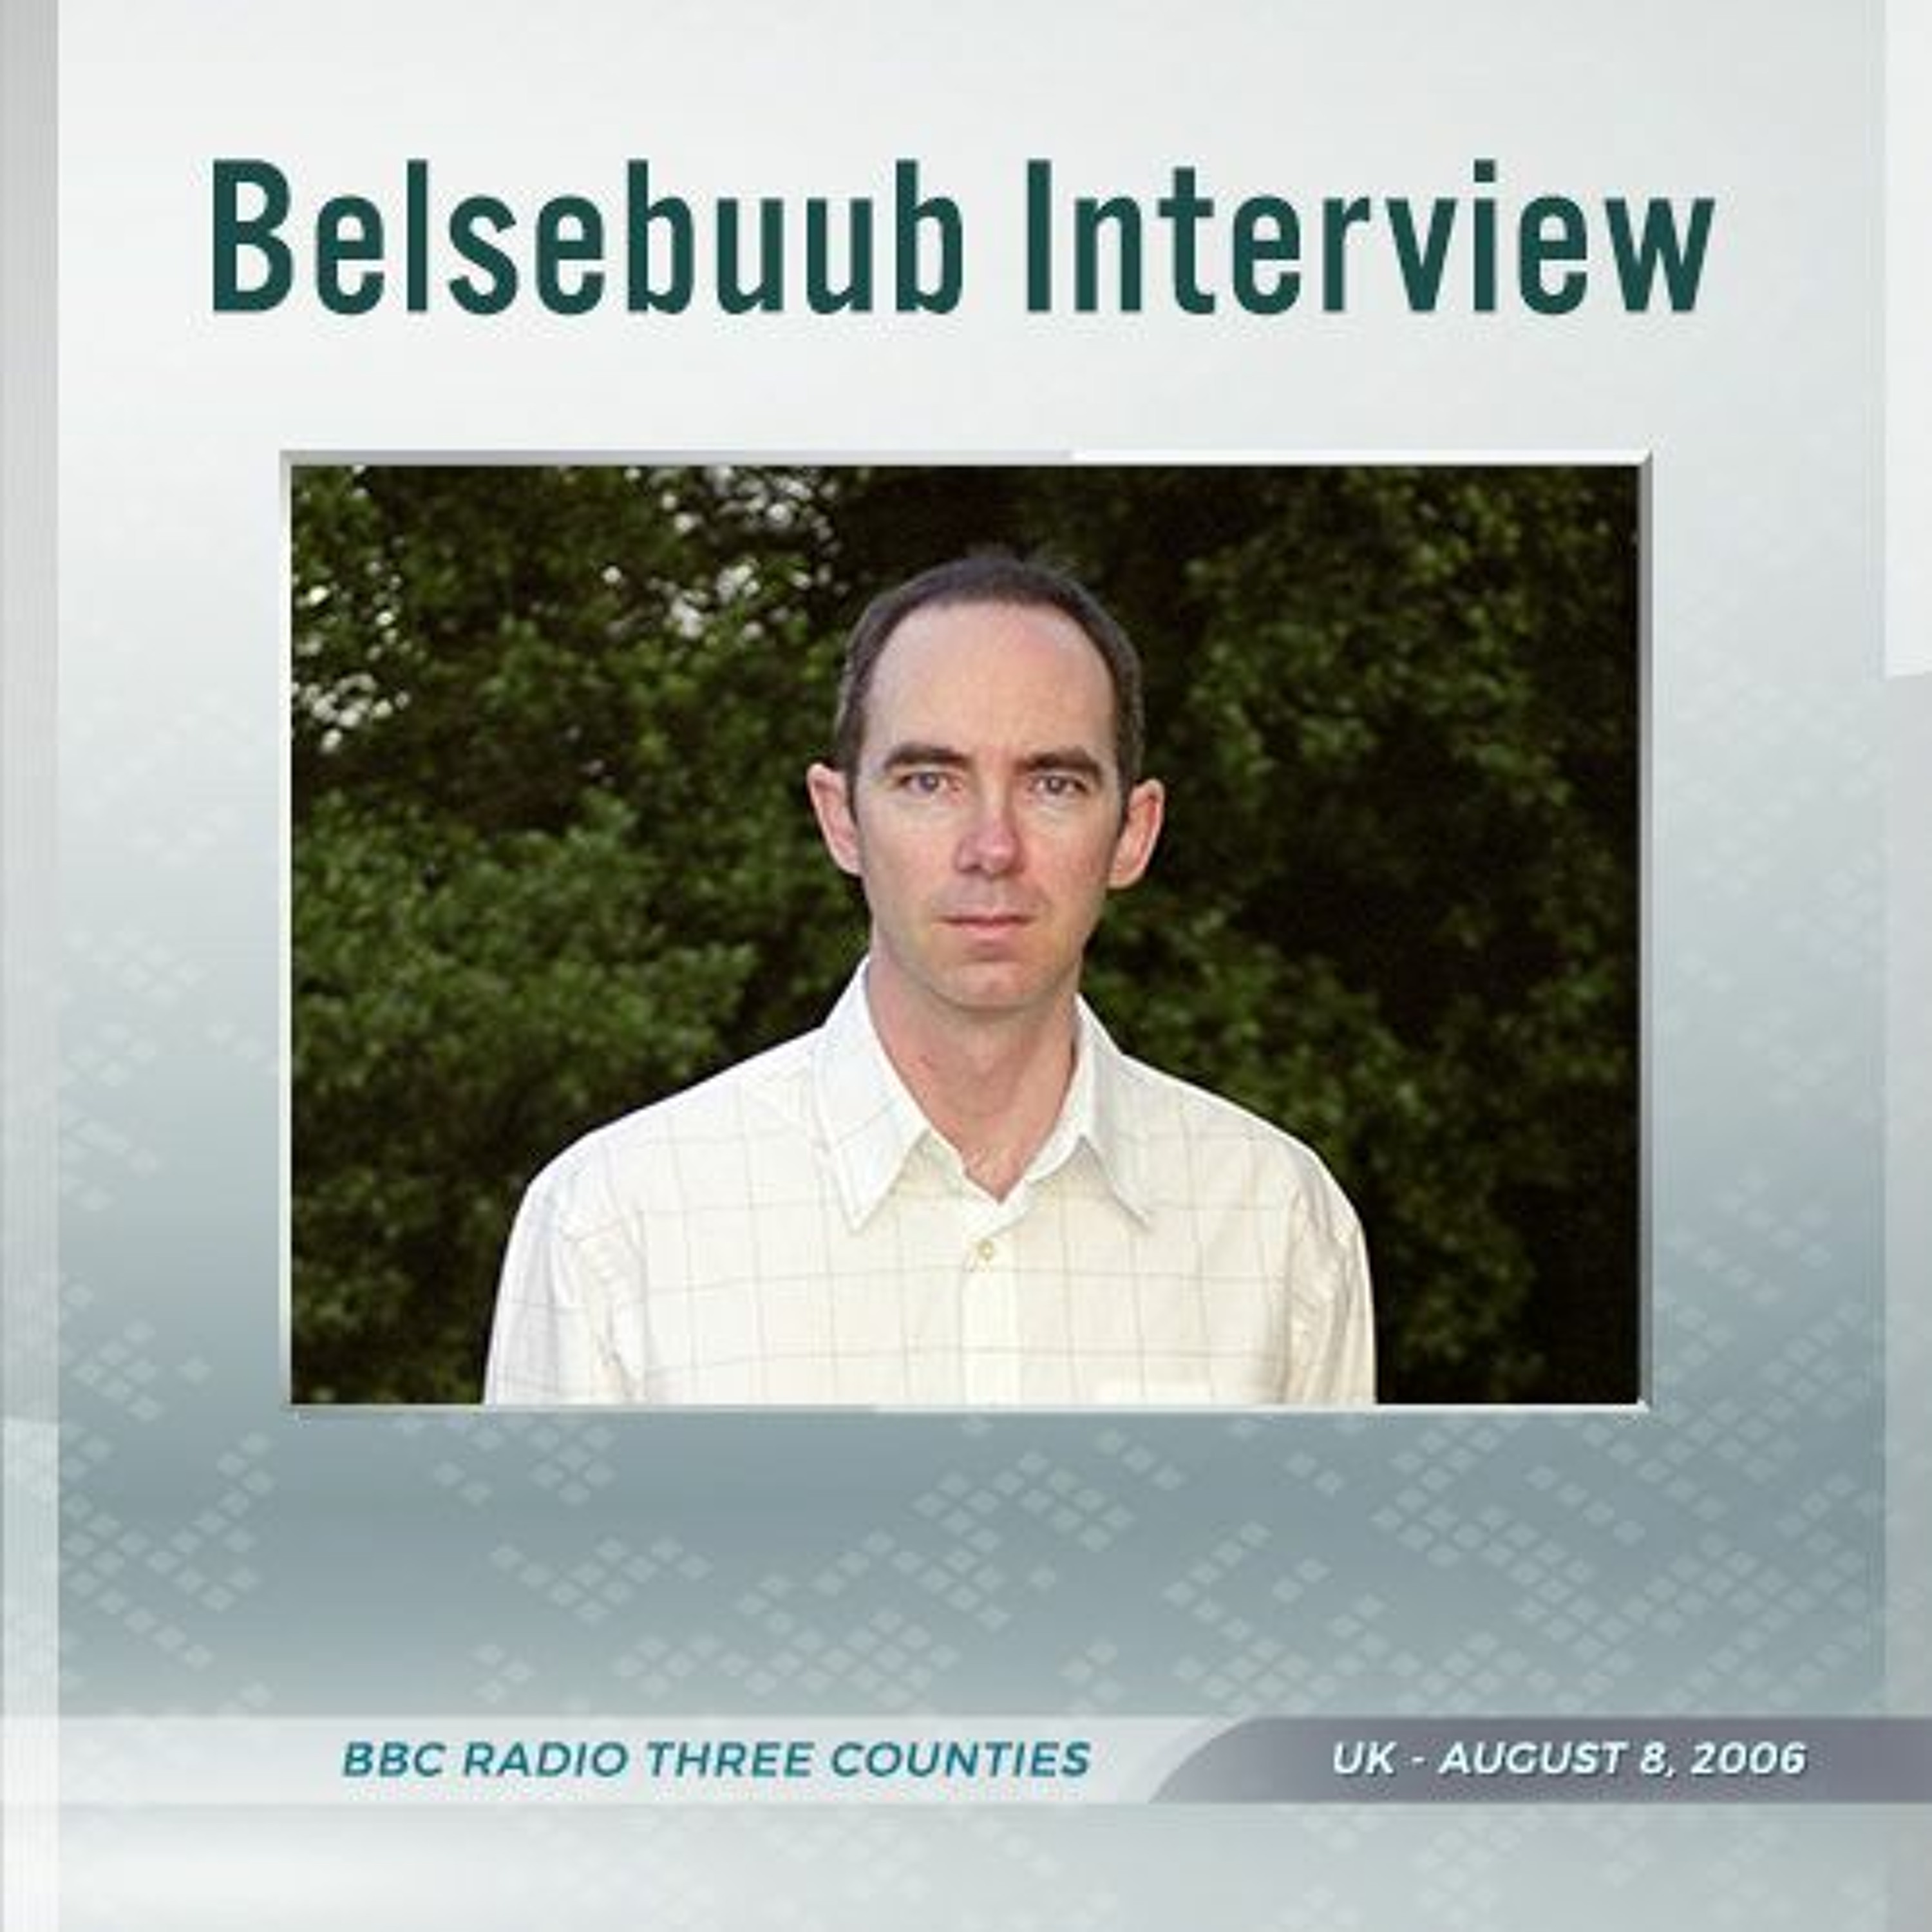 Belsebuub on BBC Radio Three Counties: The Mysterious Case of Out-Of-Body Experiences